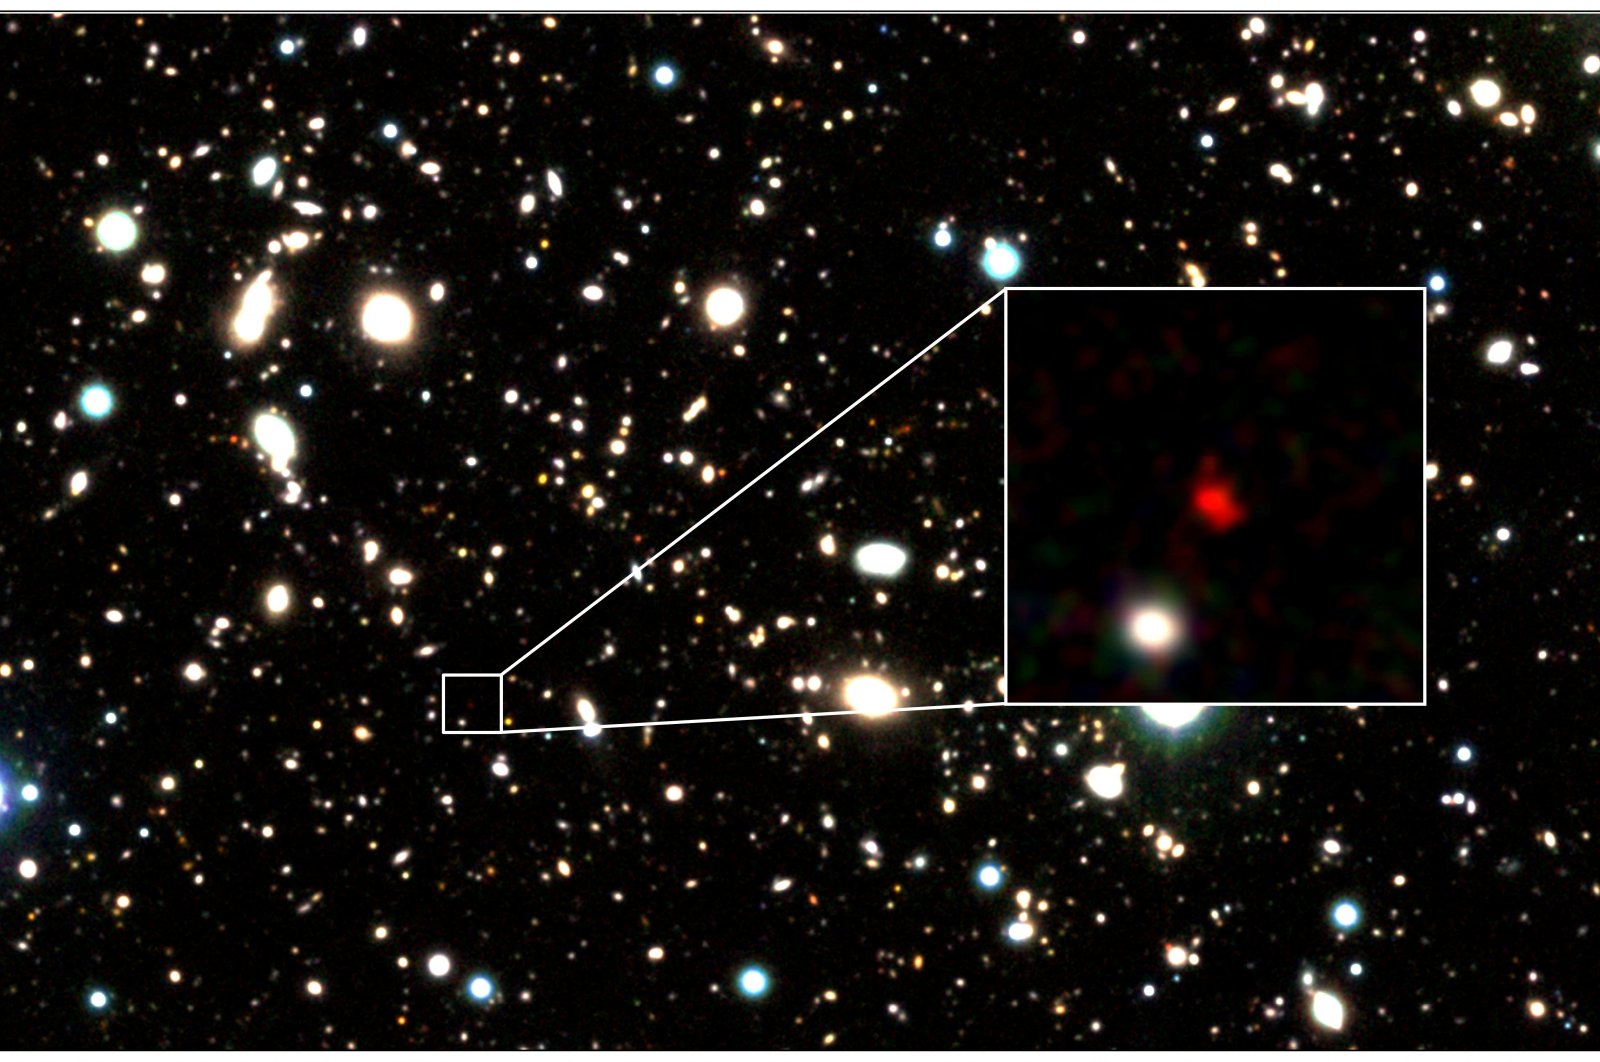 The distant early galaxy HD1, object in red, is shown at the center of this undated zoom-in handout image. (Reuters Photo)